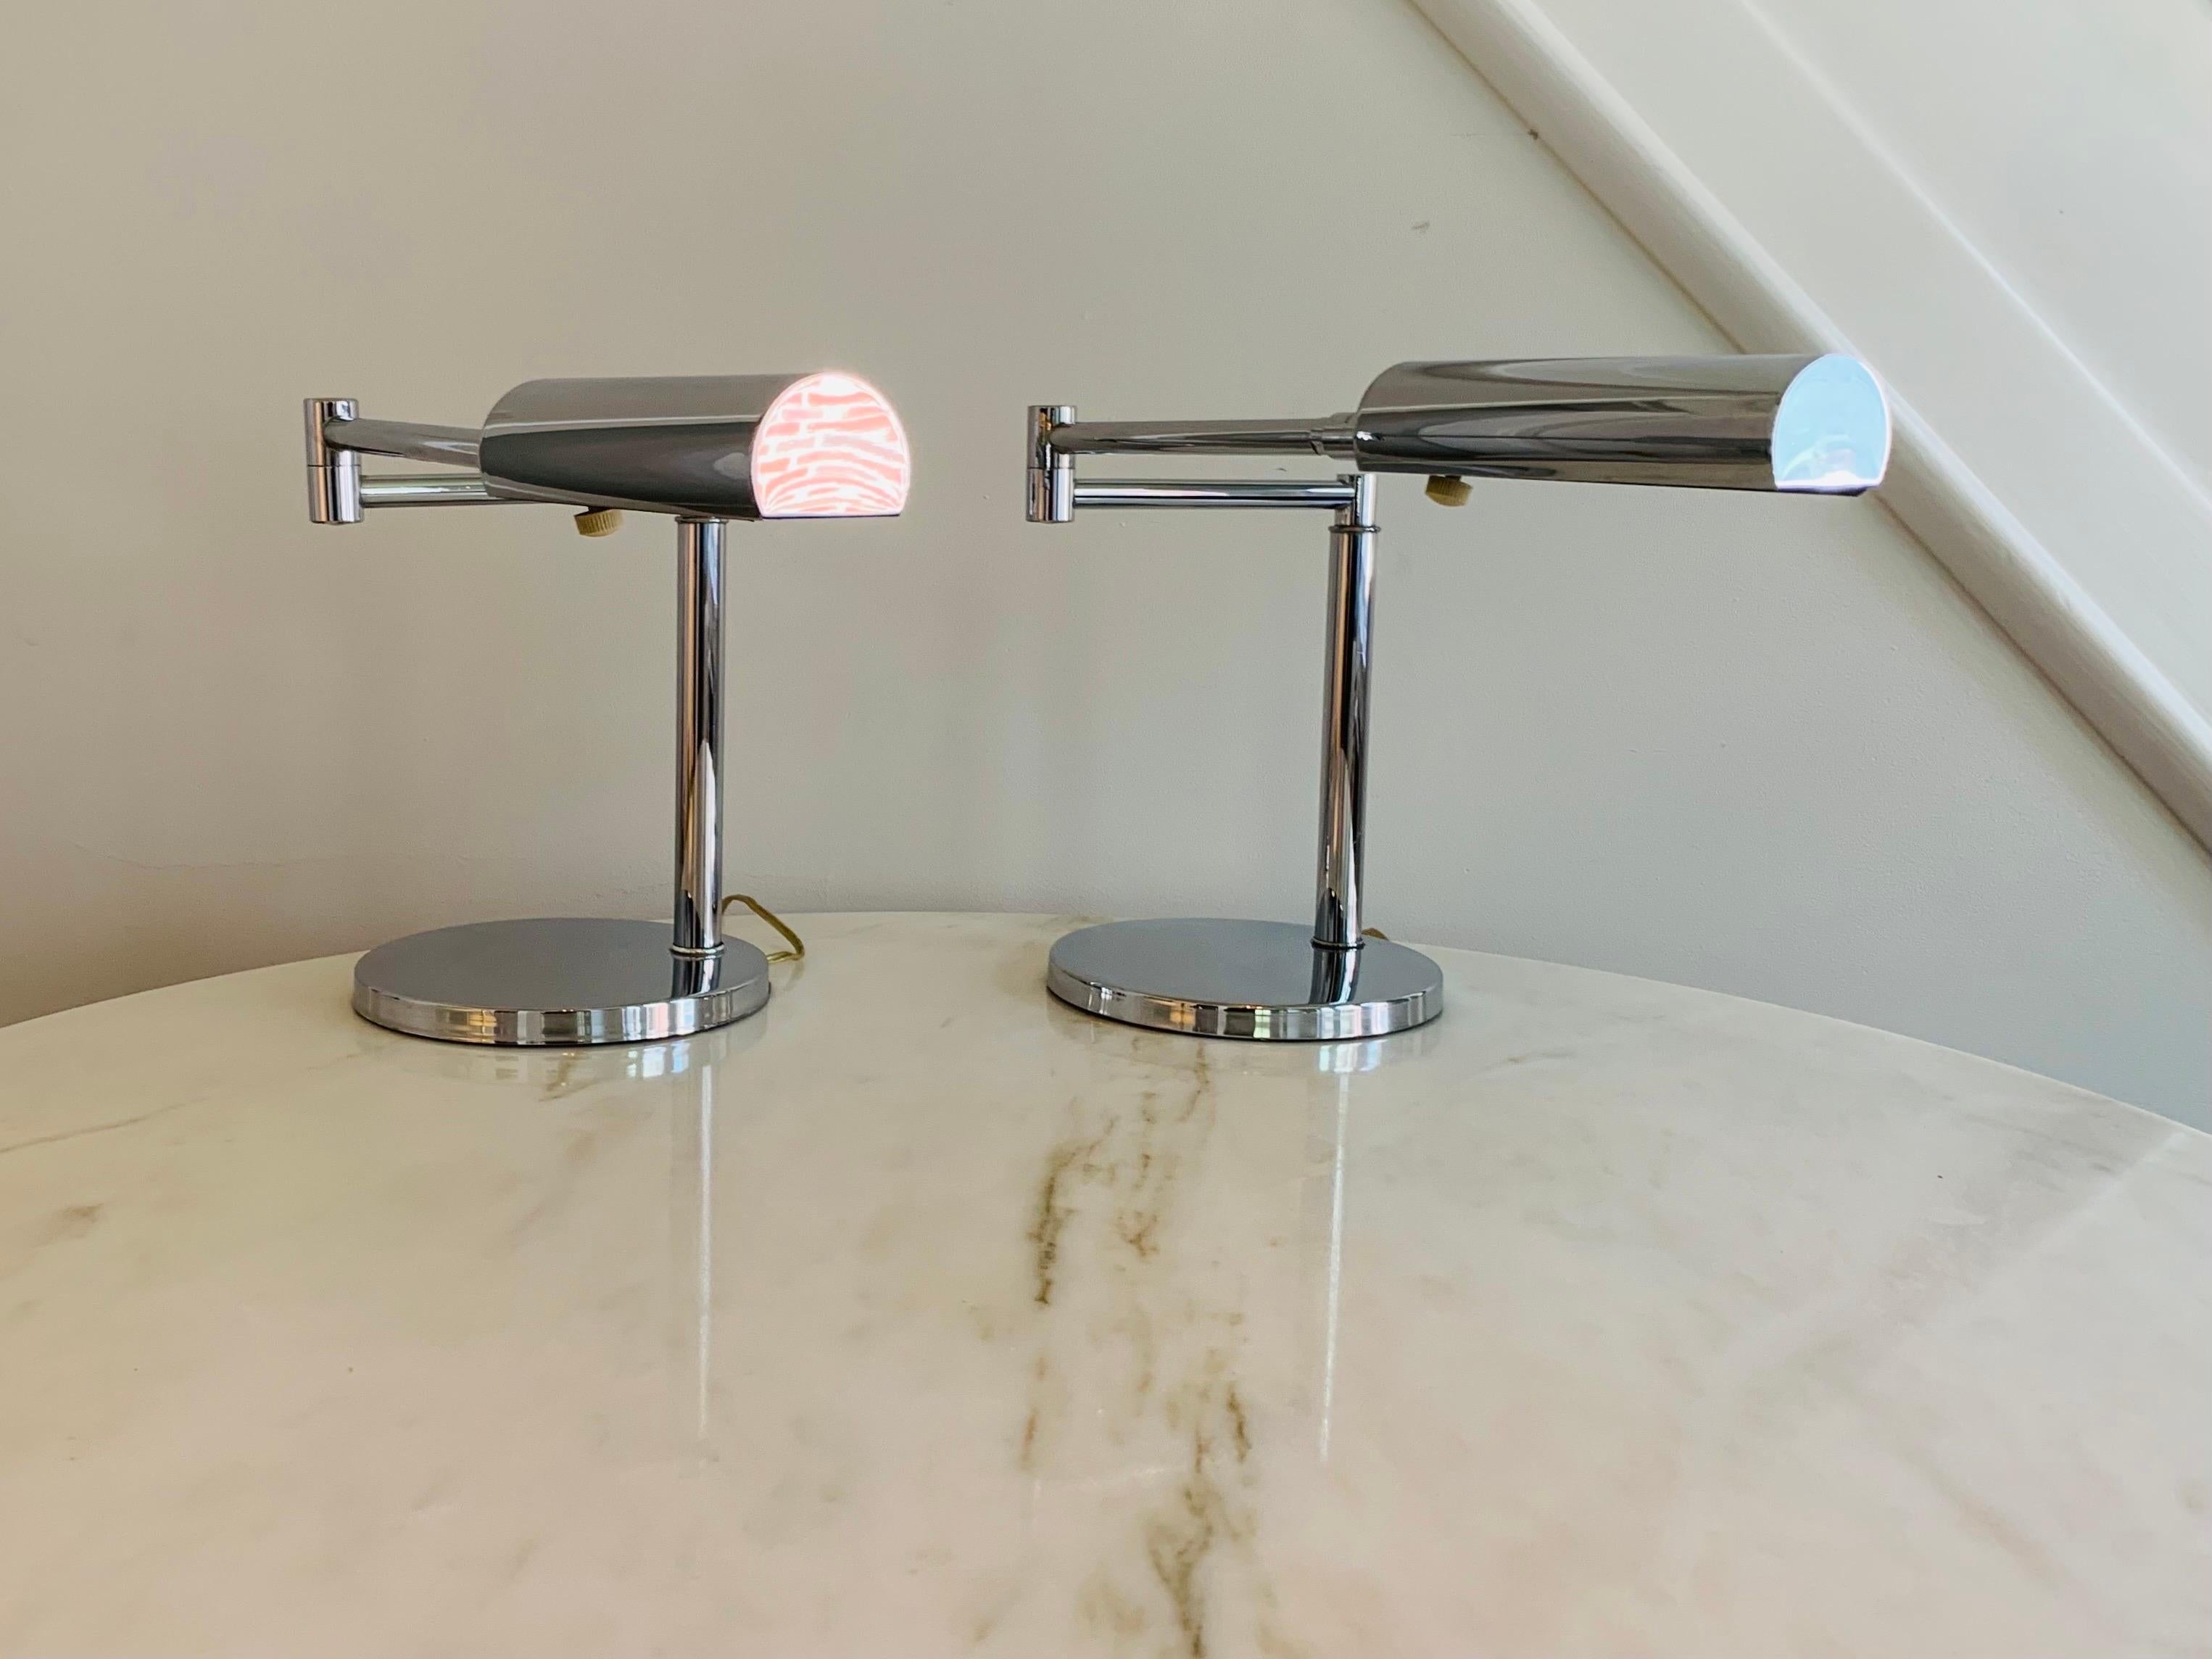 This is a pair of polished chromed-steel desk lamps by Koch + Lowy. The cylindrical shades articulate on ball and socket joints, and further adjust via a swing-arm.

Each lamp measures 8.25 inches long and wide at base, and is 12.75 inches high.